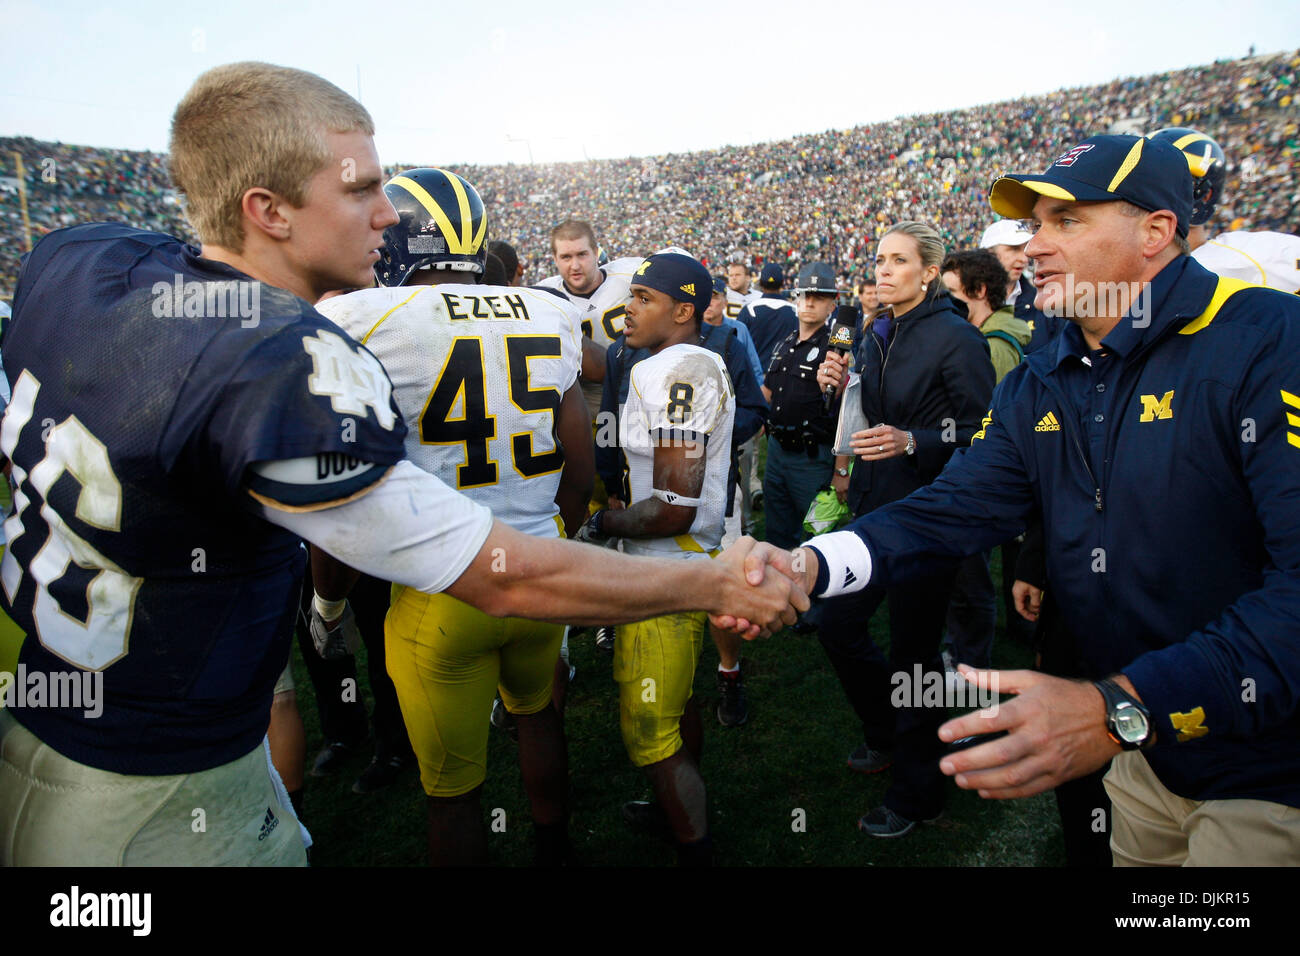 Sept. 11, 2010 - South Bend, Indiana, USA - University of Michigan coach Rich Rodriguez shakes hands with Notre Dame quarterback Nate Montana Saturday September 11, 2010 after Michigan beat Notre Dame 28-24 at Notre Dame Stadium in South Bend, Indiana. (Credit Image: © Jim Z. Rider/ZUMApress.com) Stock Photo